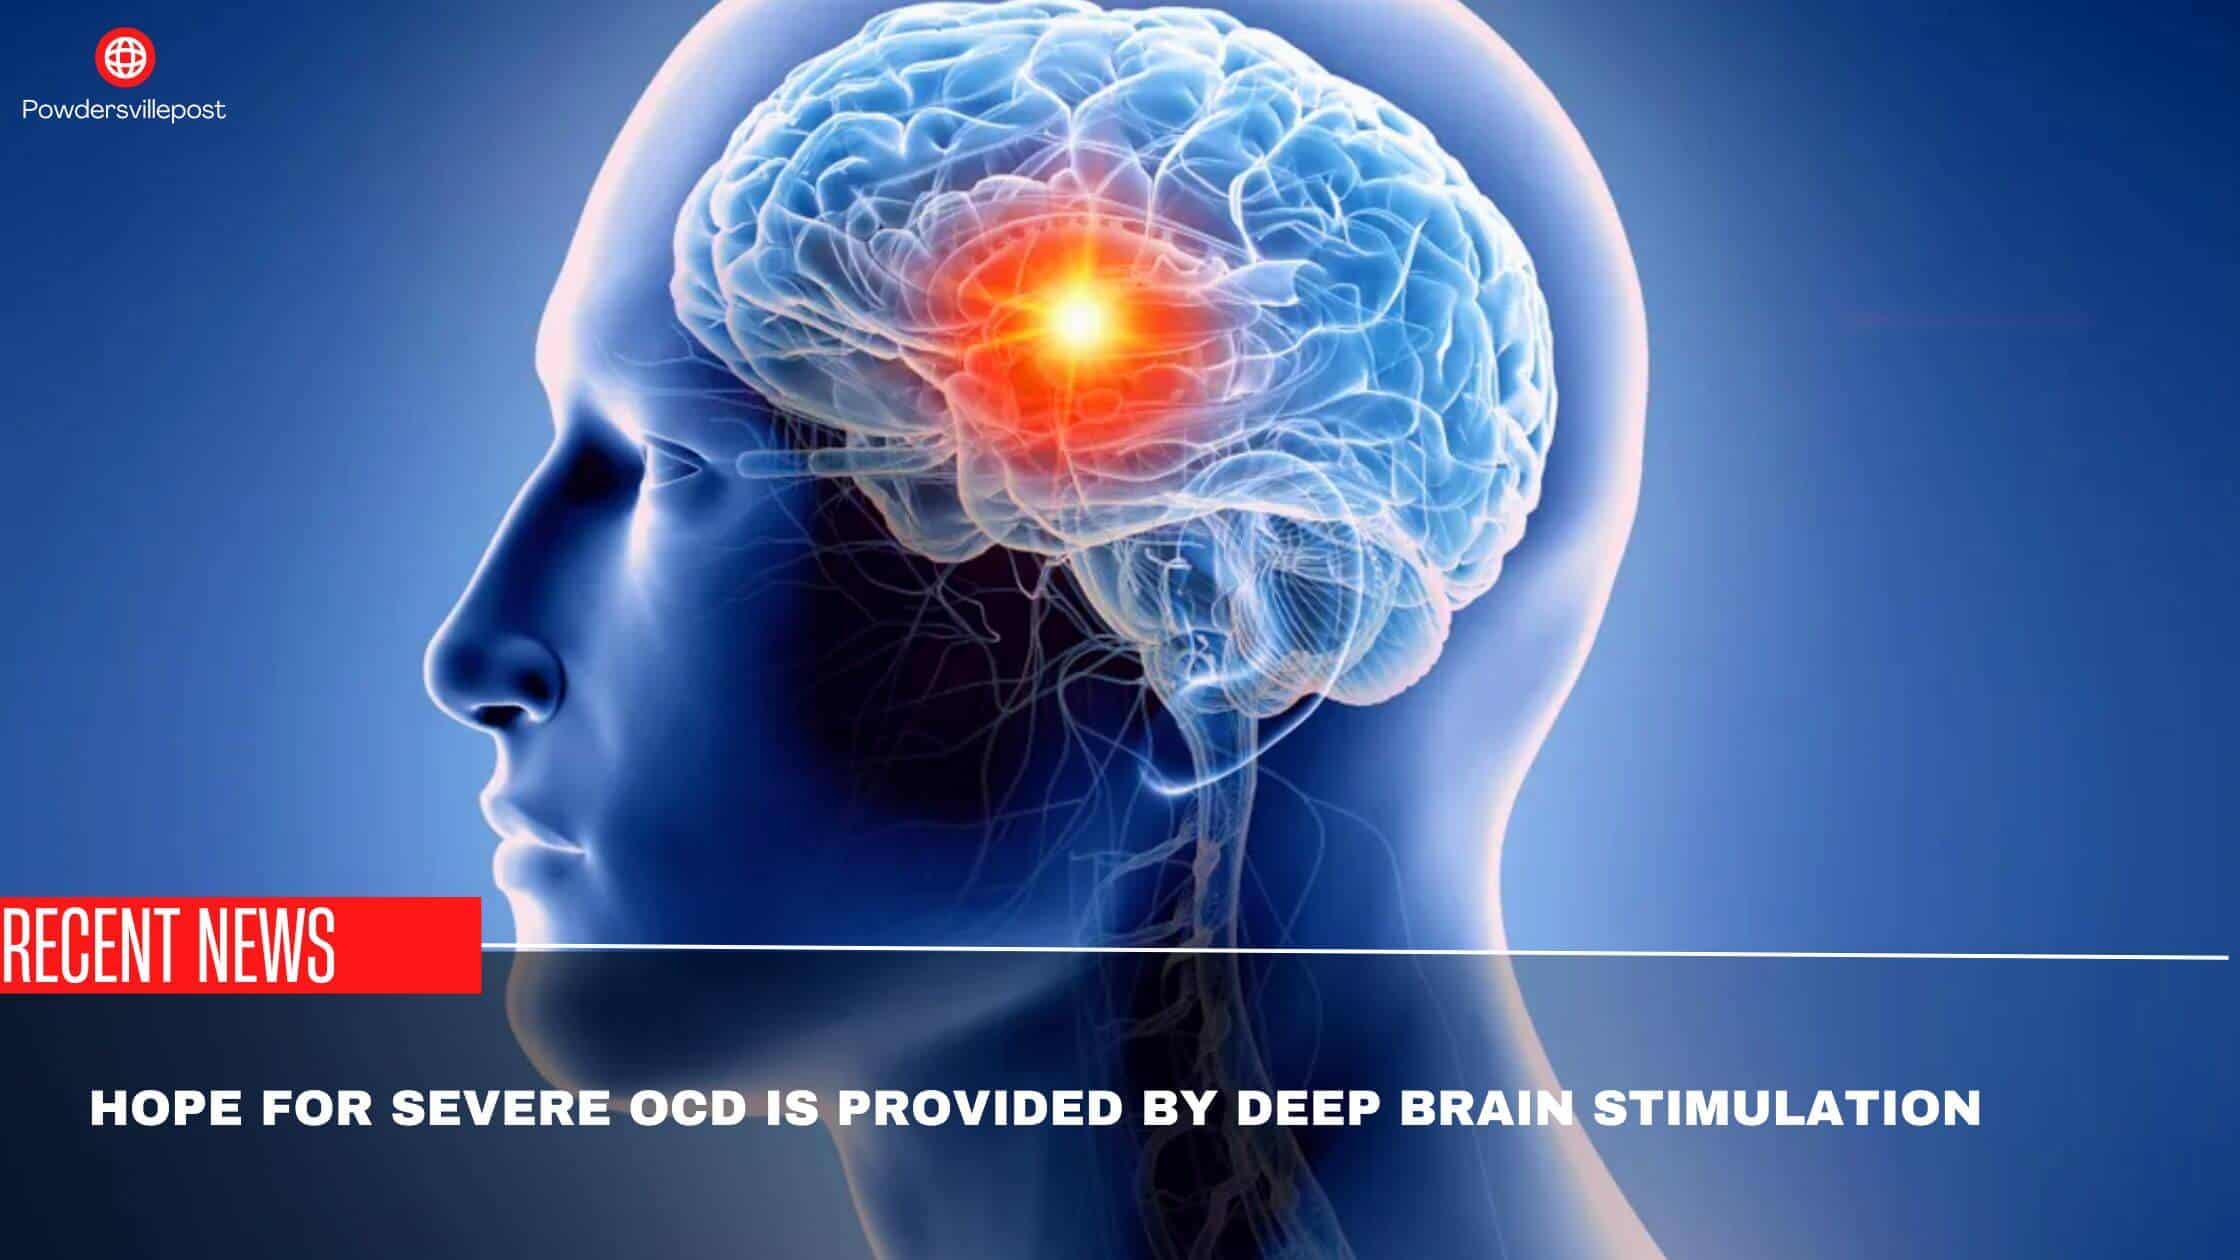 Hope For Severe OCD Is Provided By Deep Brain Stimulation